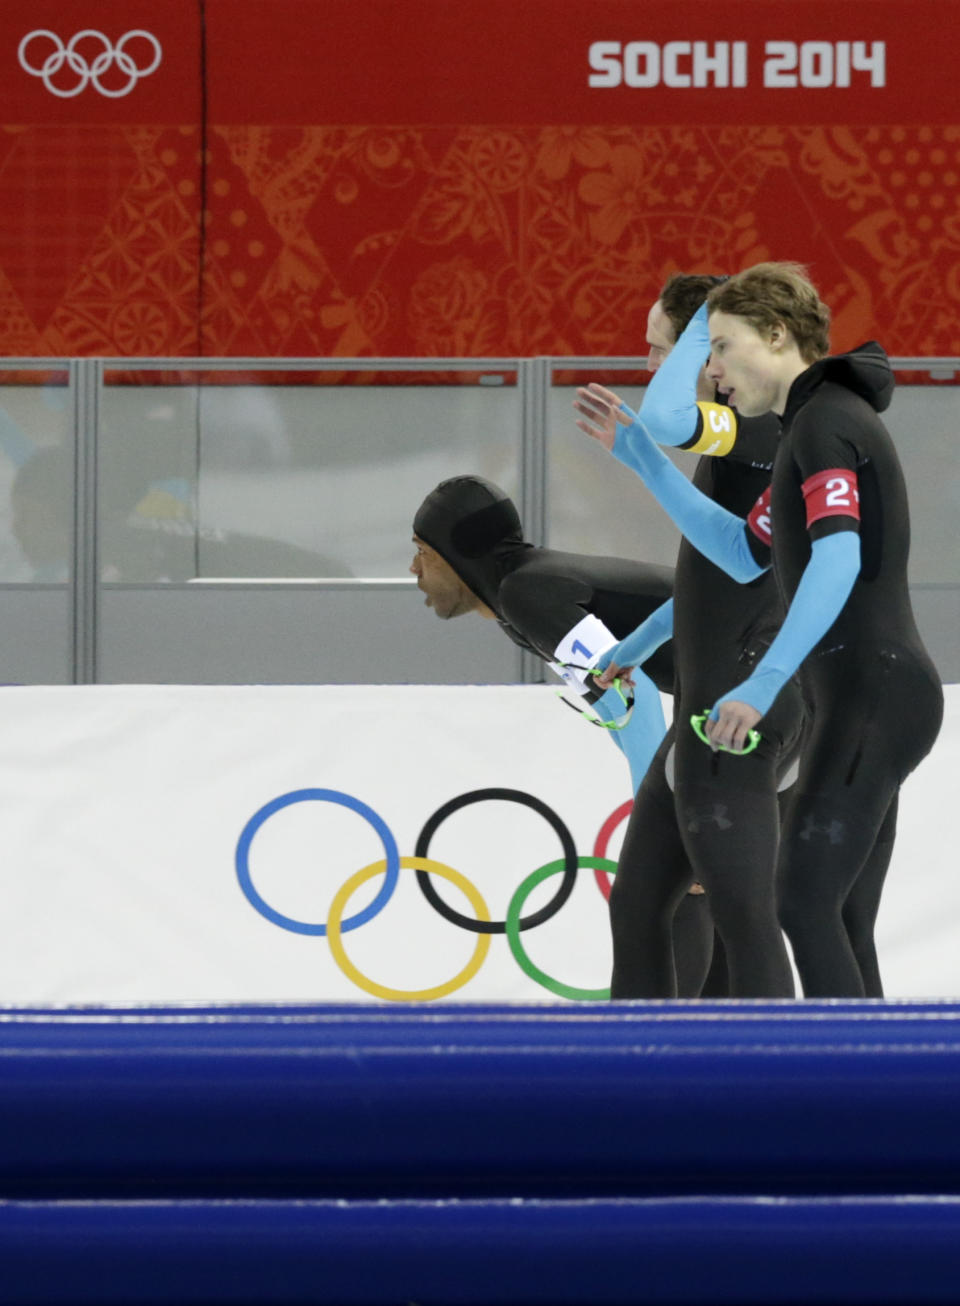 The U.S. speedskating team, Shani Davis, bending, Jonathan Kuck, background, and Brian Hansen catch their breath after competing in the men's speedskating team pursuit quarterfinals at the Adler Arena Skating Center during the 2014 Winter Olympics in Sochi, Russia, Friday, Feb. 21, 2014. (AP Photo/Matt Dunham)